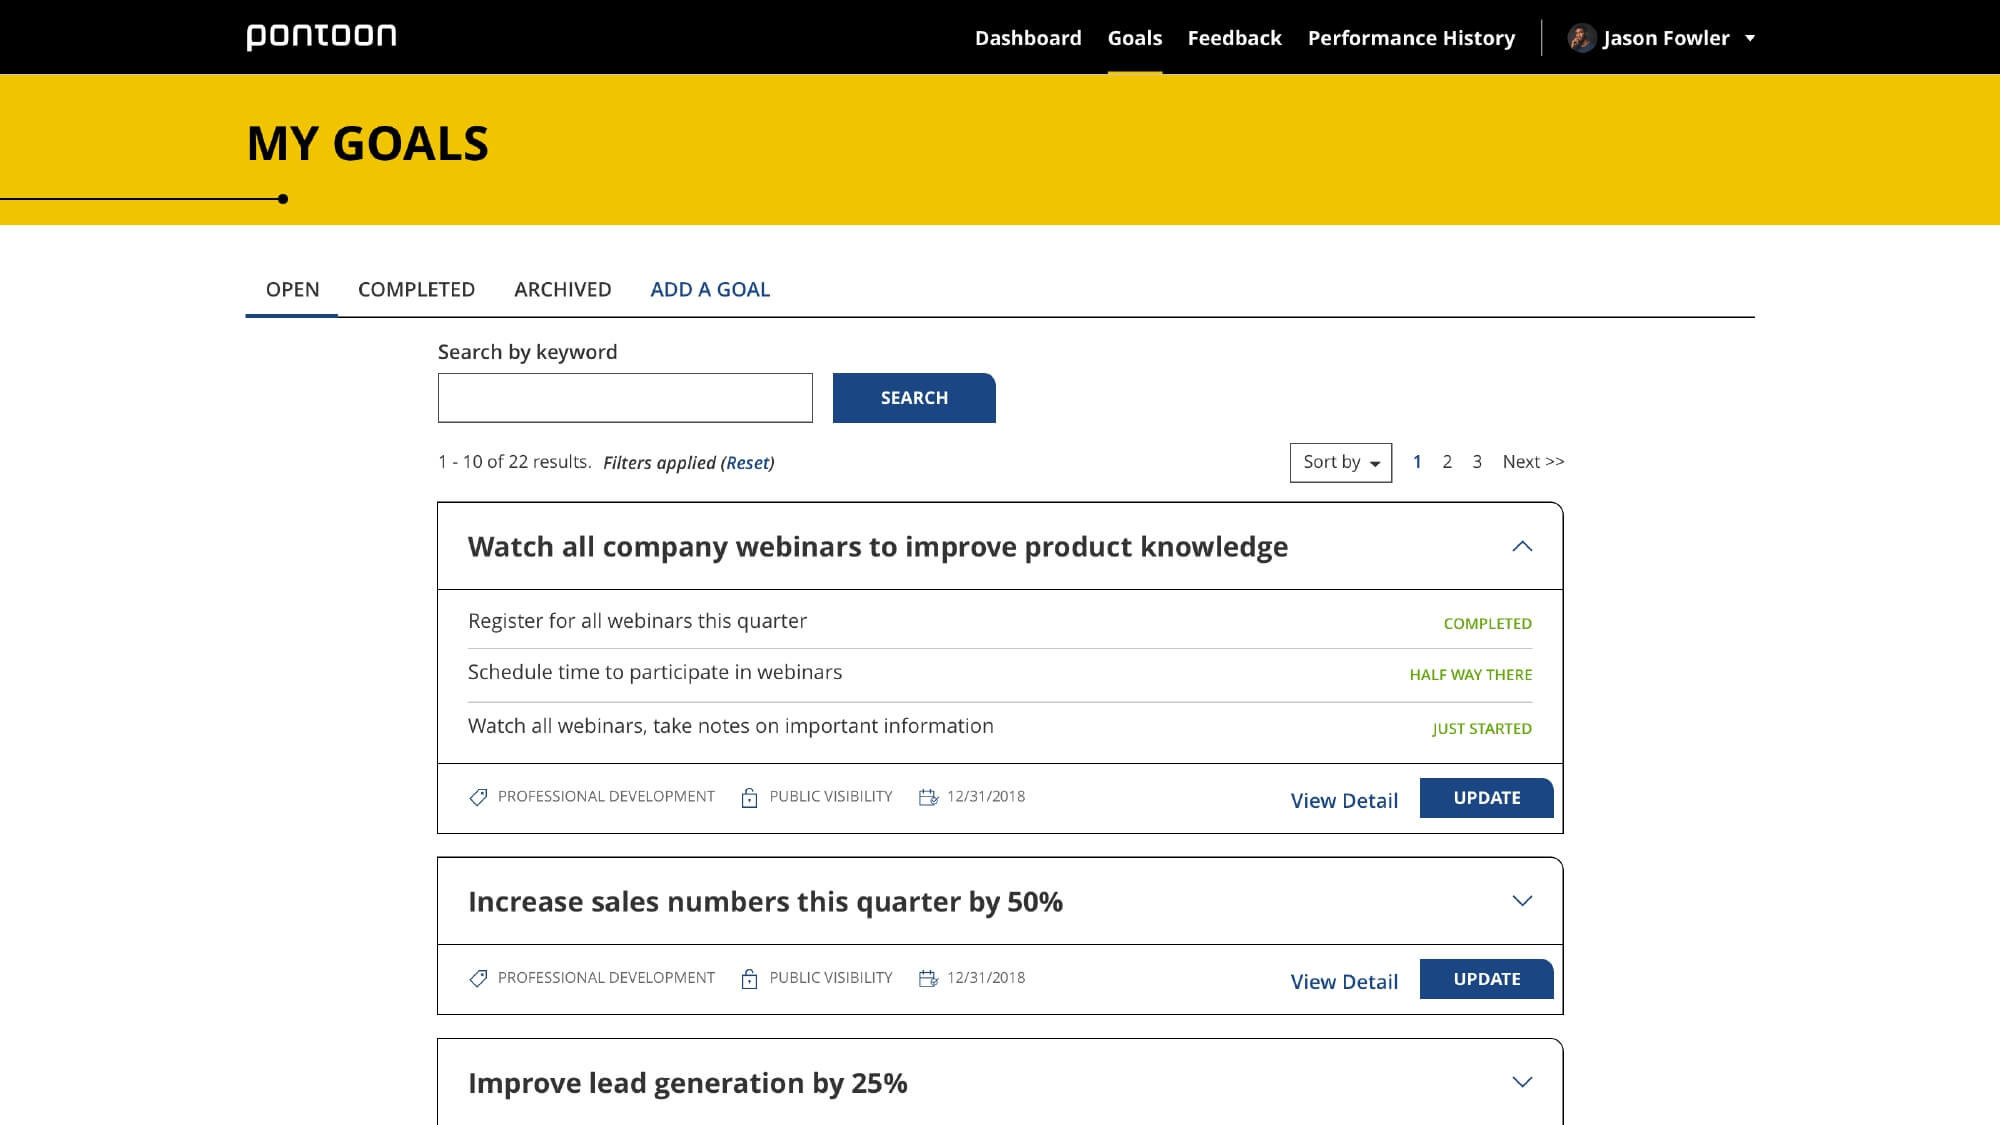 Pontoon's performance management portal listing an employee's quarterly goals with detailed milestones for each goal.